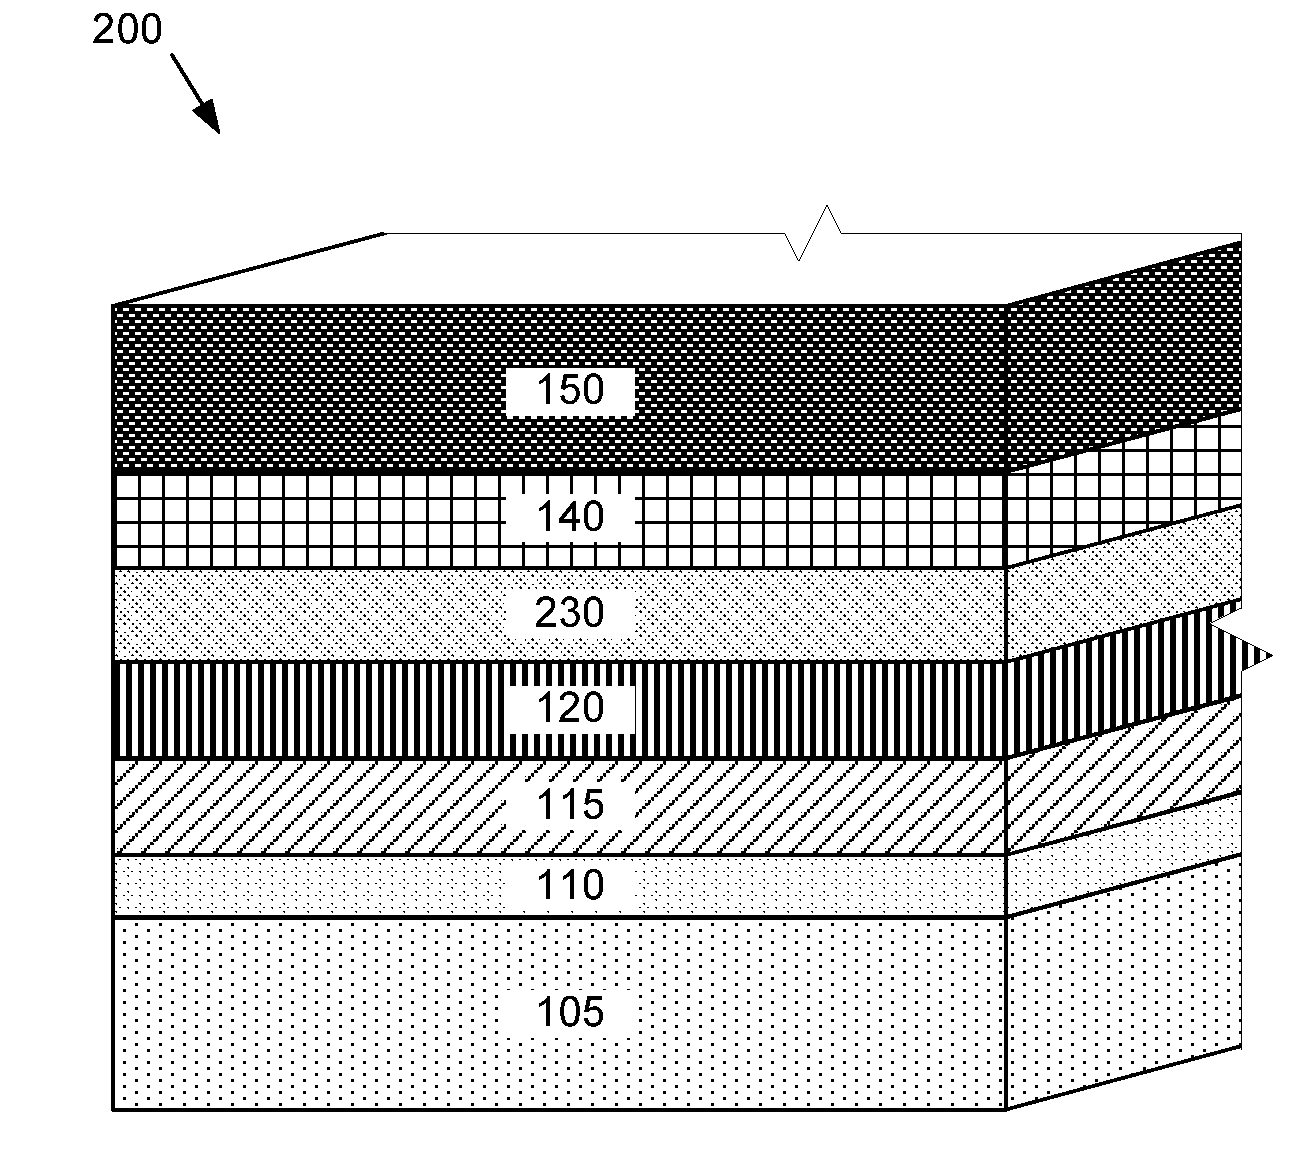 Photovoltaic Device Including A Back Contact And Method Of Manufacturing